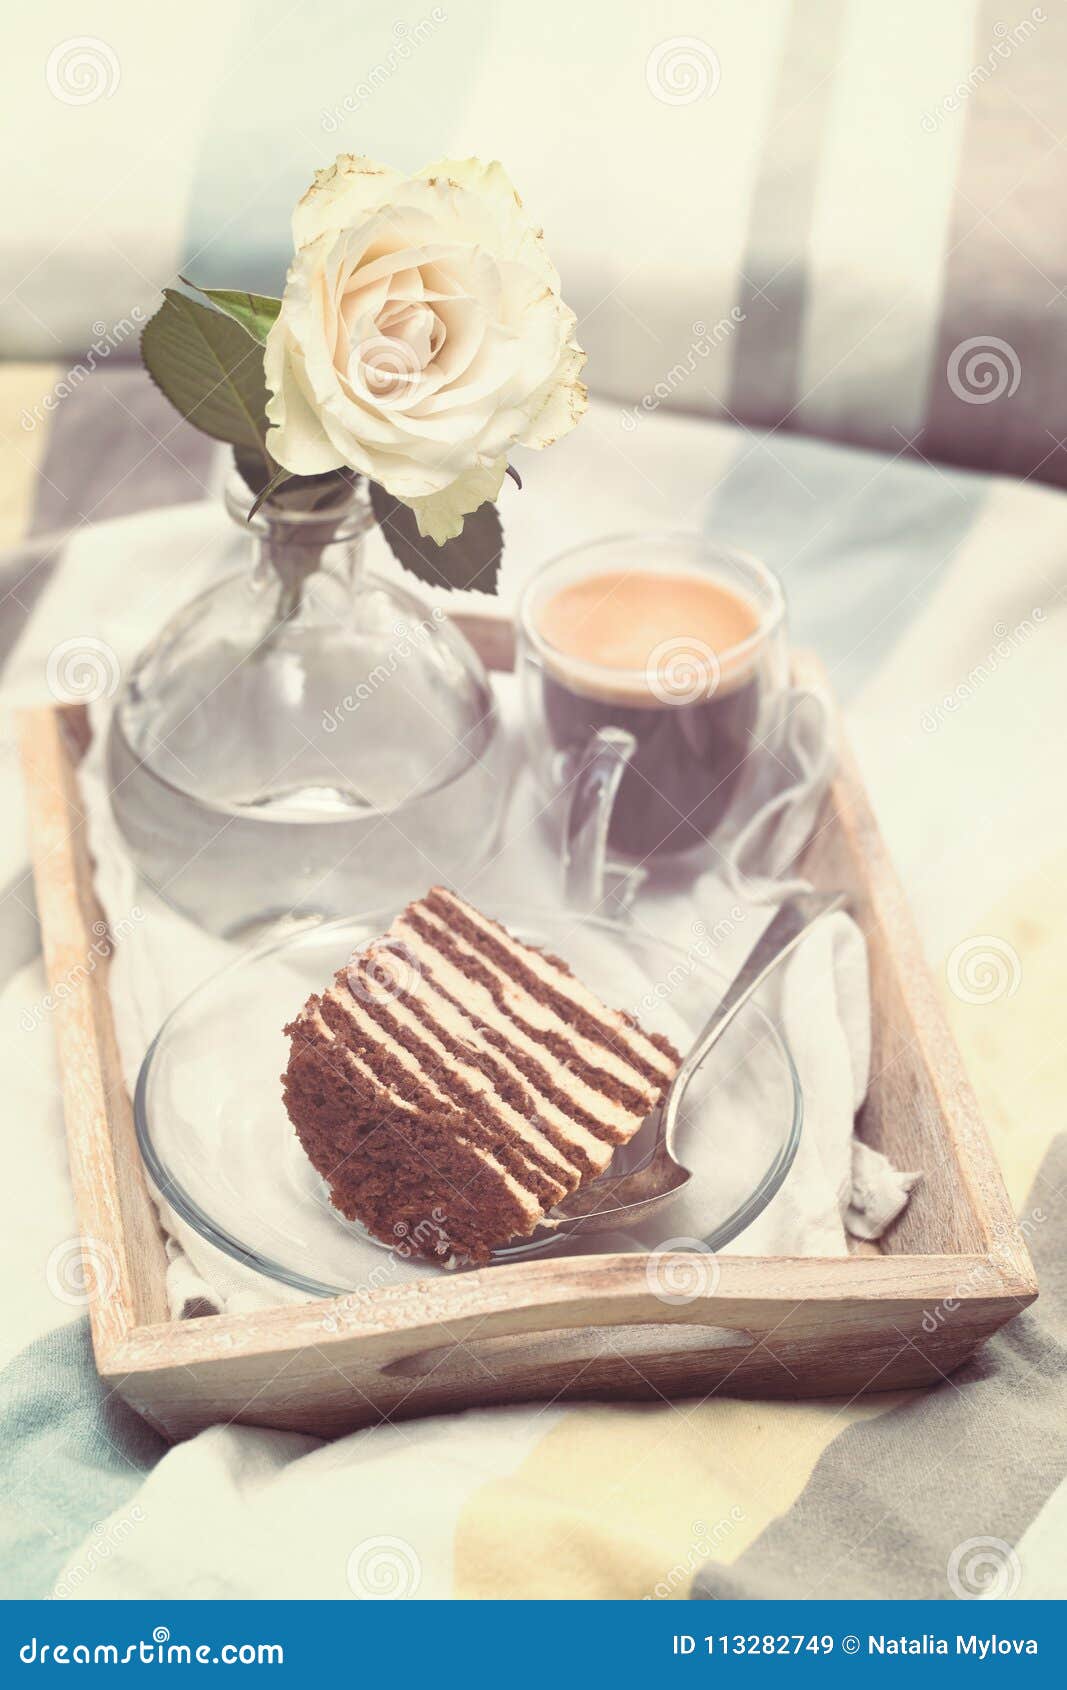 Cake with Coffee and Flower in Tray on Bed Stock Image - Image of ...